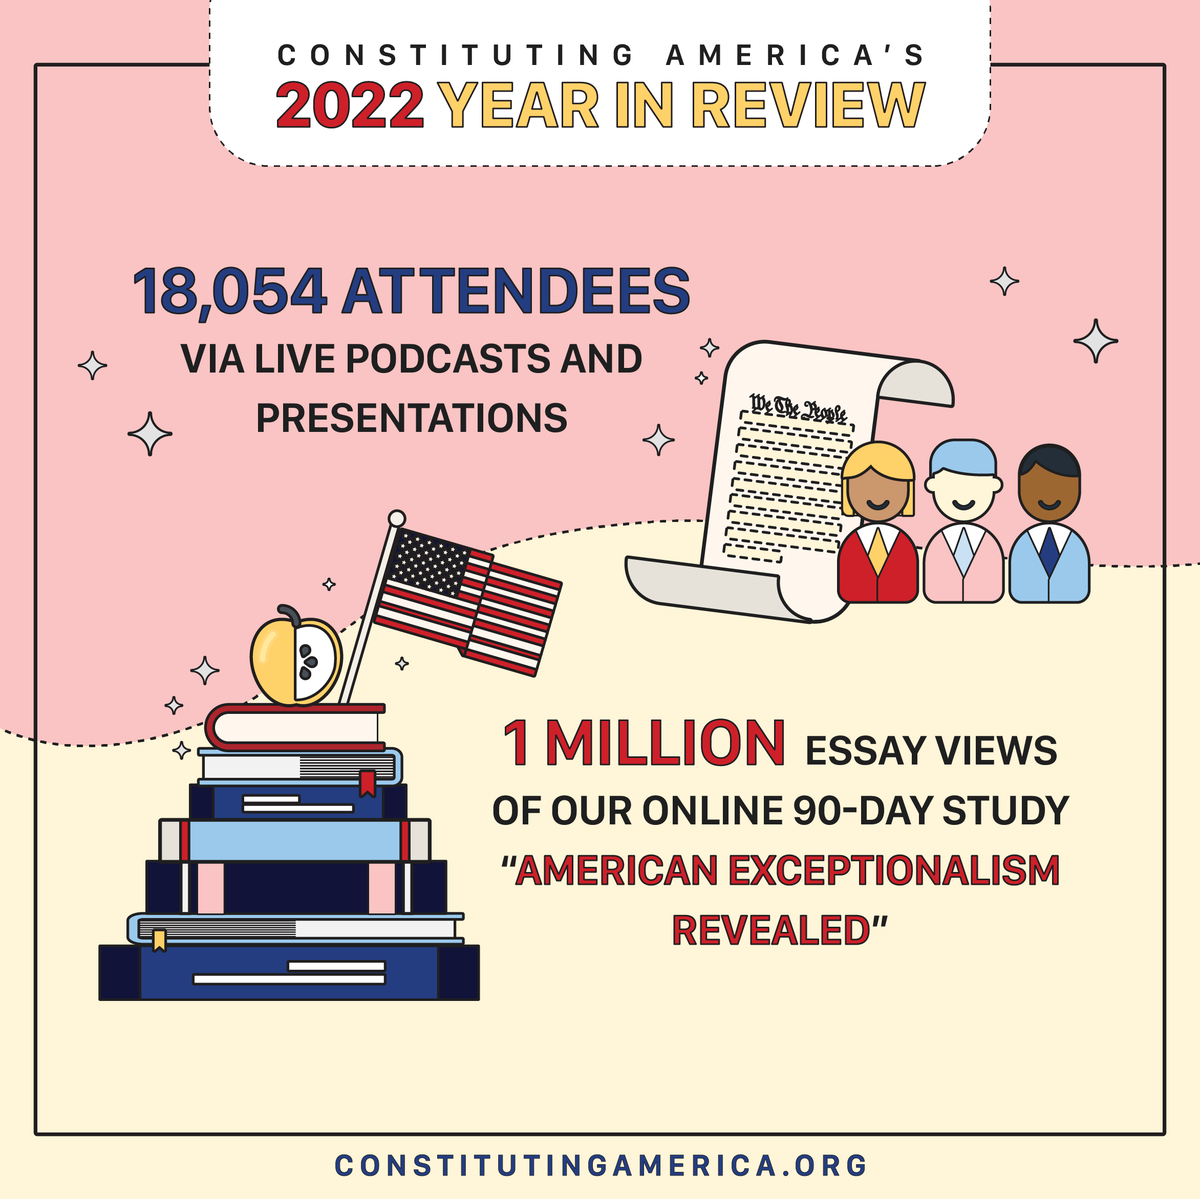 More, from our 2022 Year In Review! A Record-Breaking Year, Thanks To You! #Thankyou #YearInReview #YearInReview2022 #GiveBack #Constitution #ConstitutionEducation